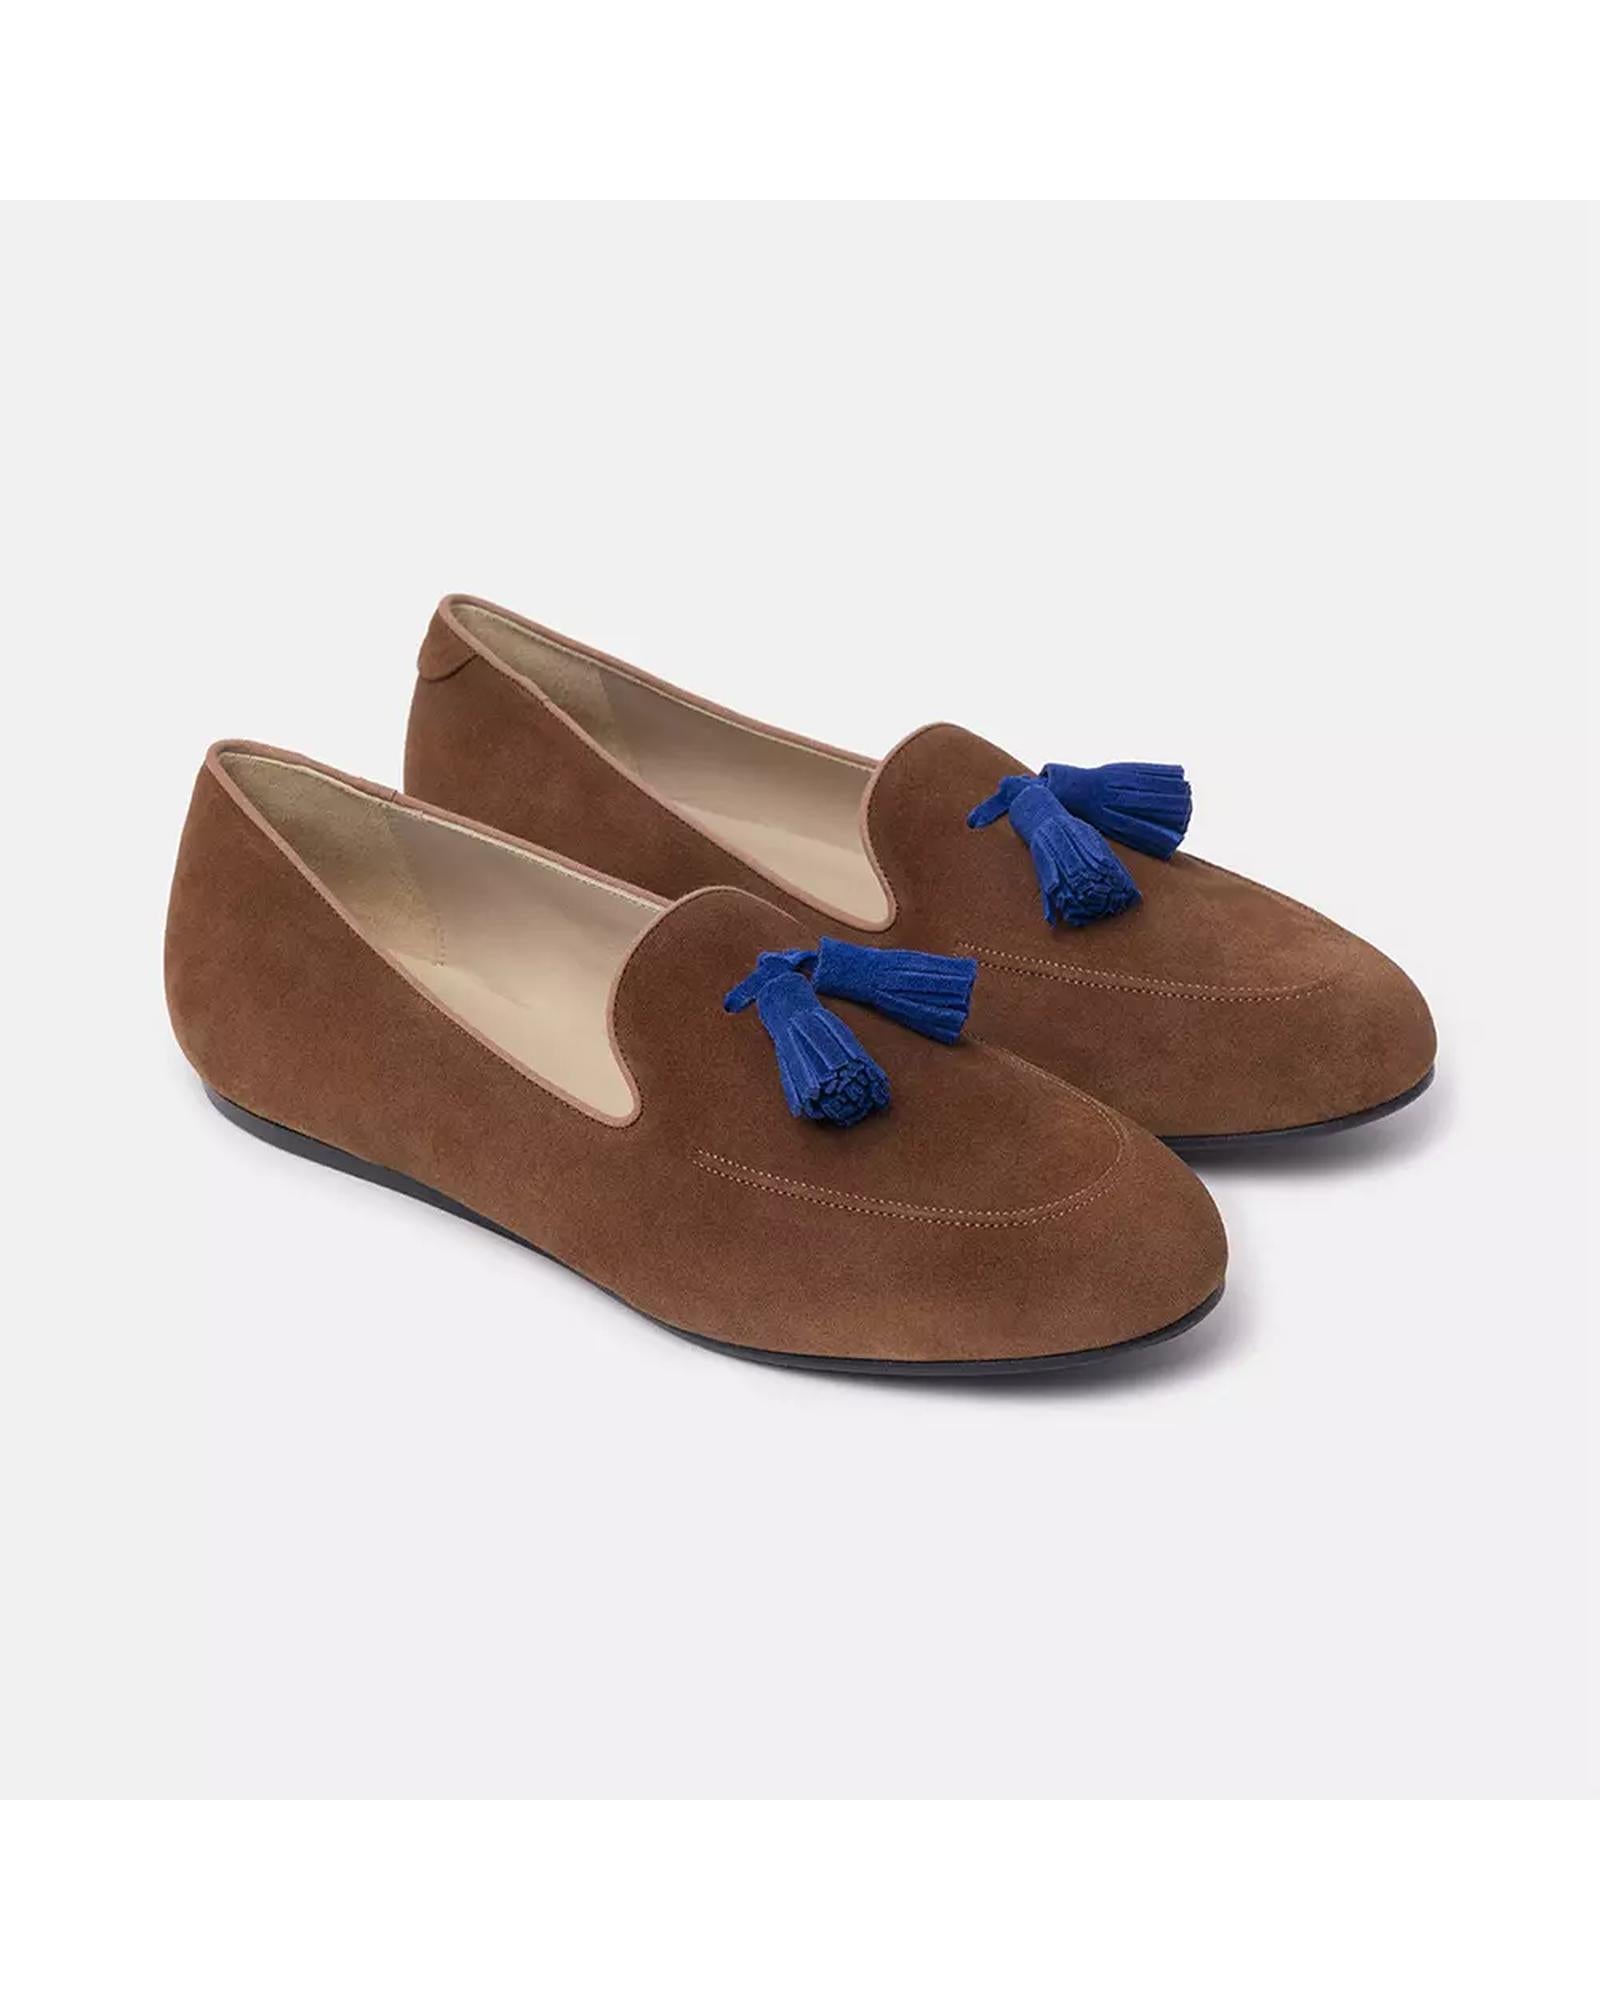 Charles Philip Ronald Suede Leather Moccasins 39 EU Men